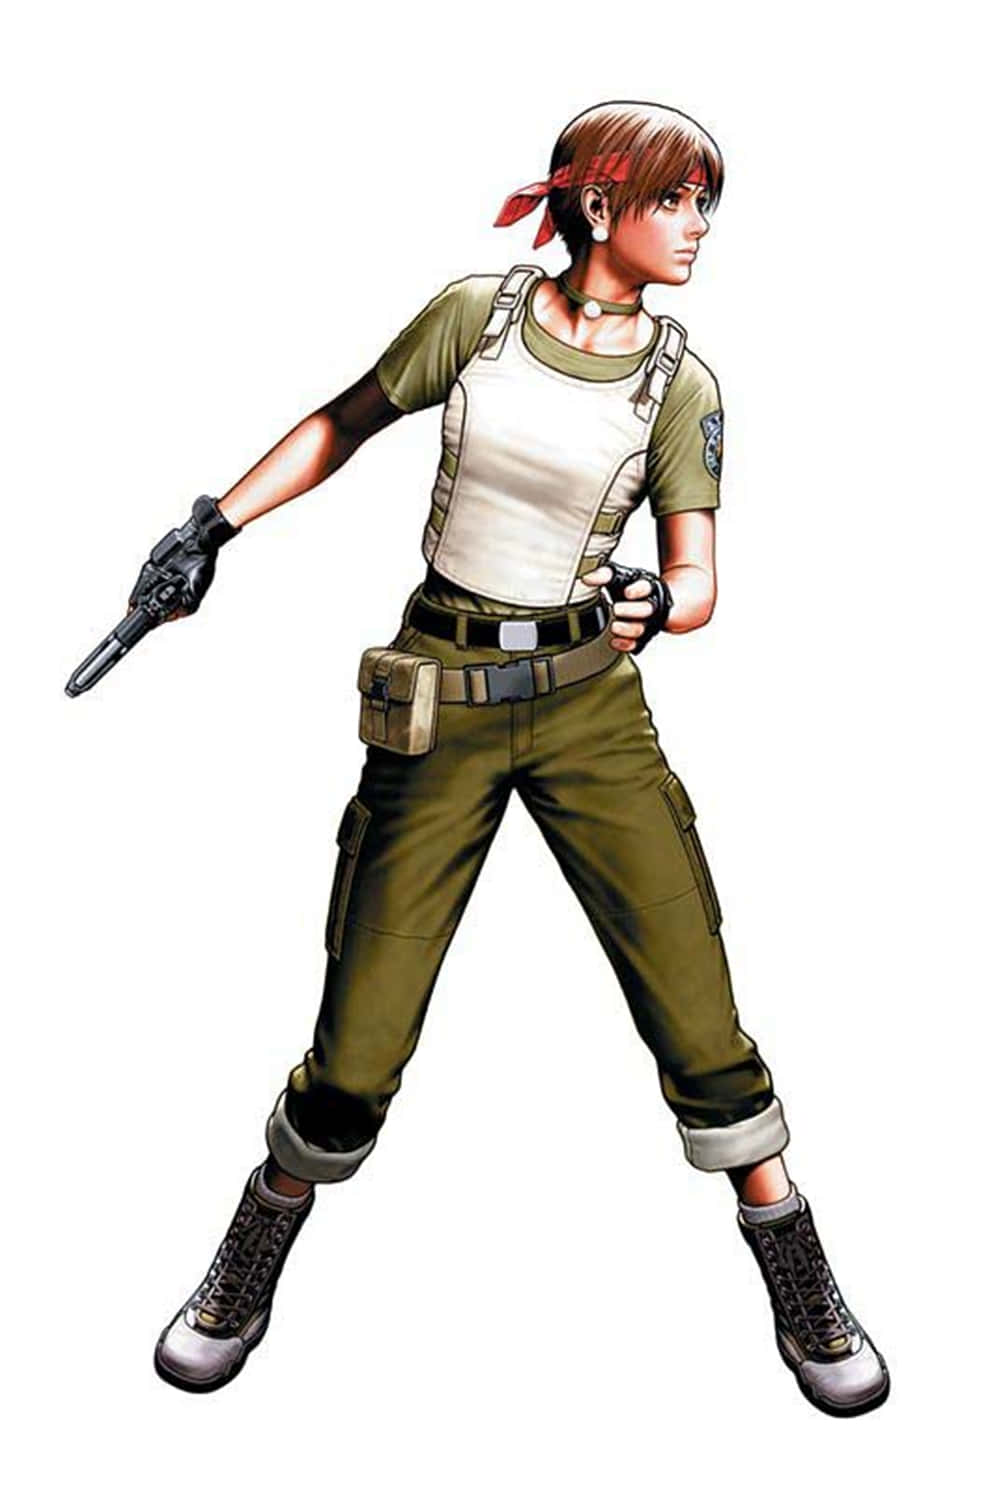 "rebecca Chambers - The Resilient Combat Medic Of Resident Evil" Wallpaper